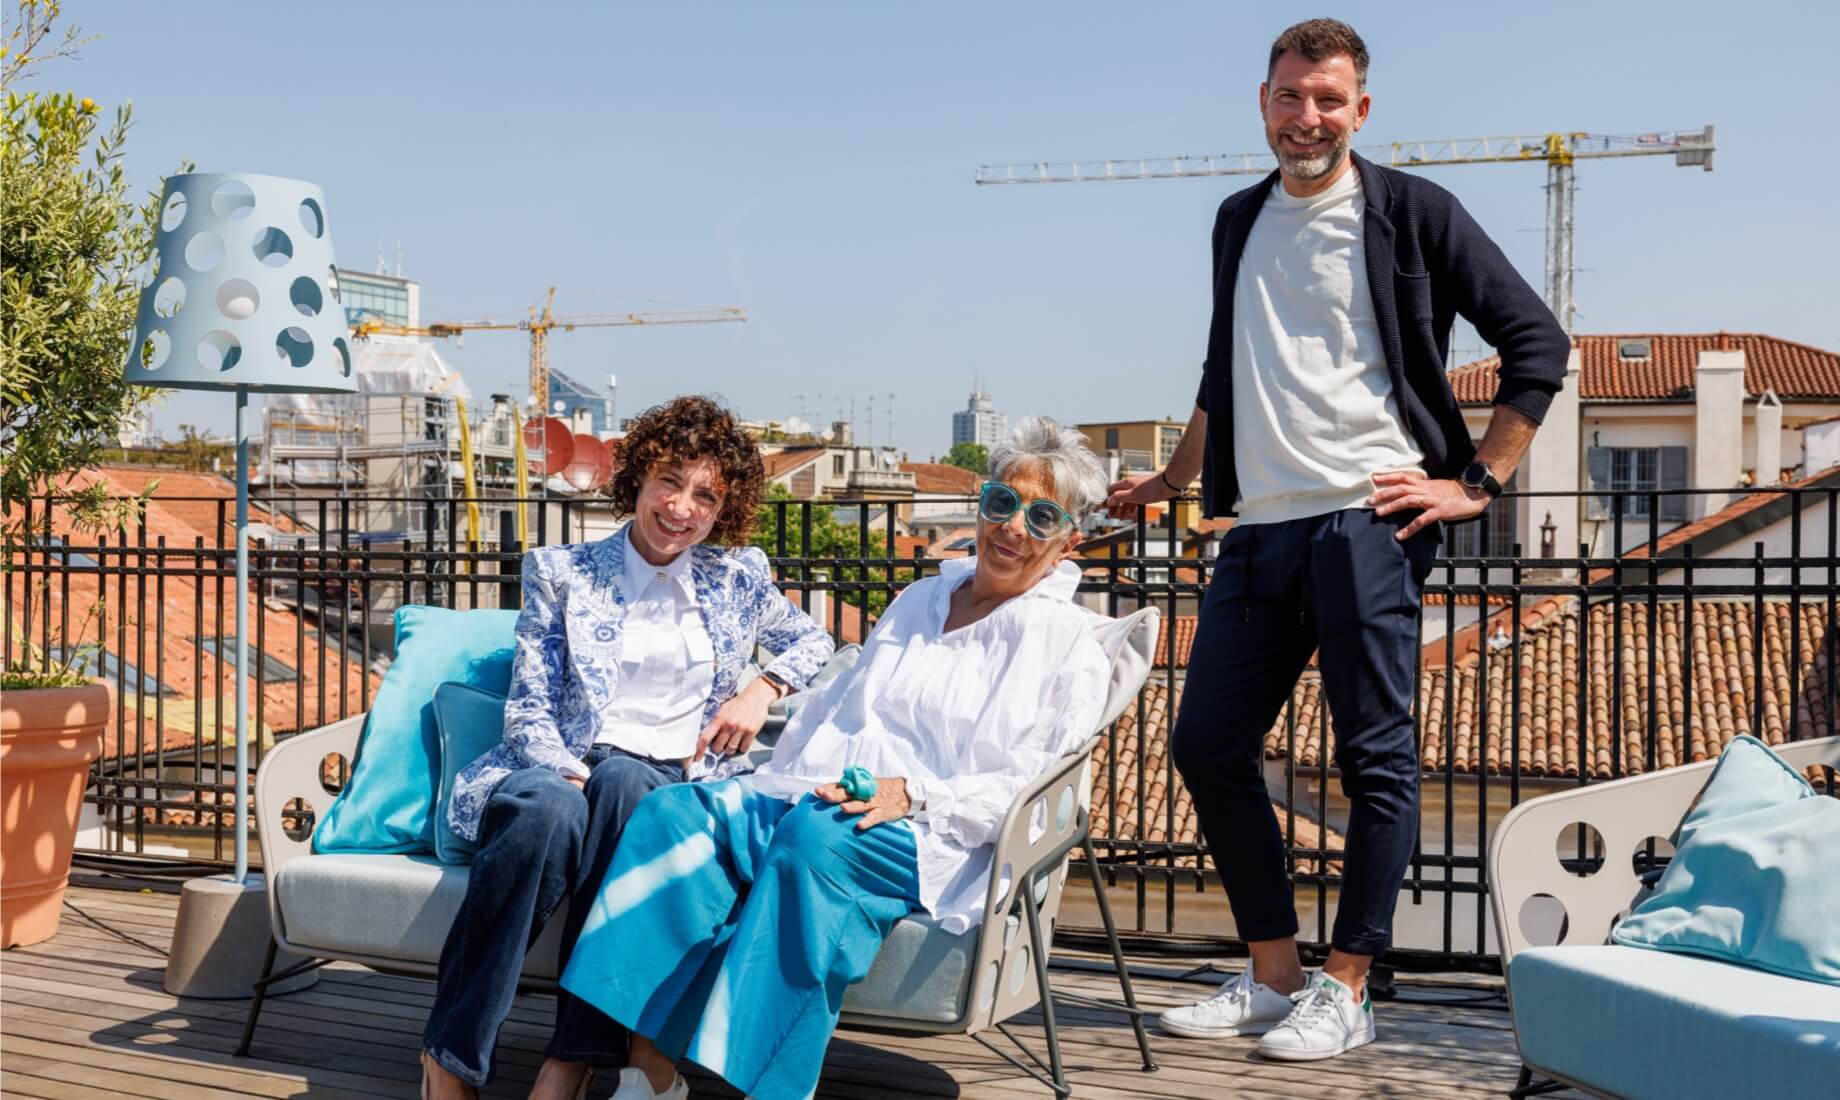 From left: Sales Manager Miriam Vernier, Designer Paola Navone, Production Manager Rudy Vernier.